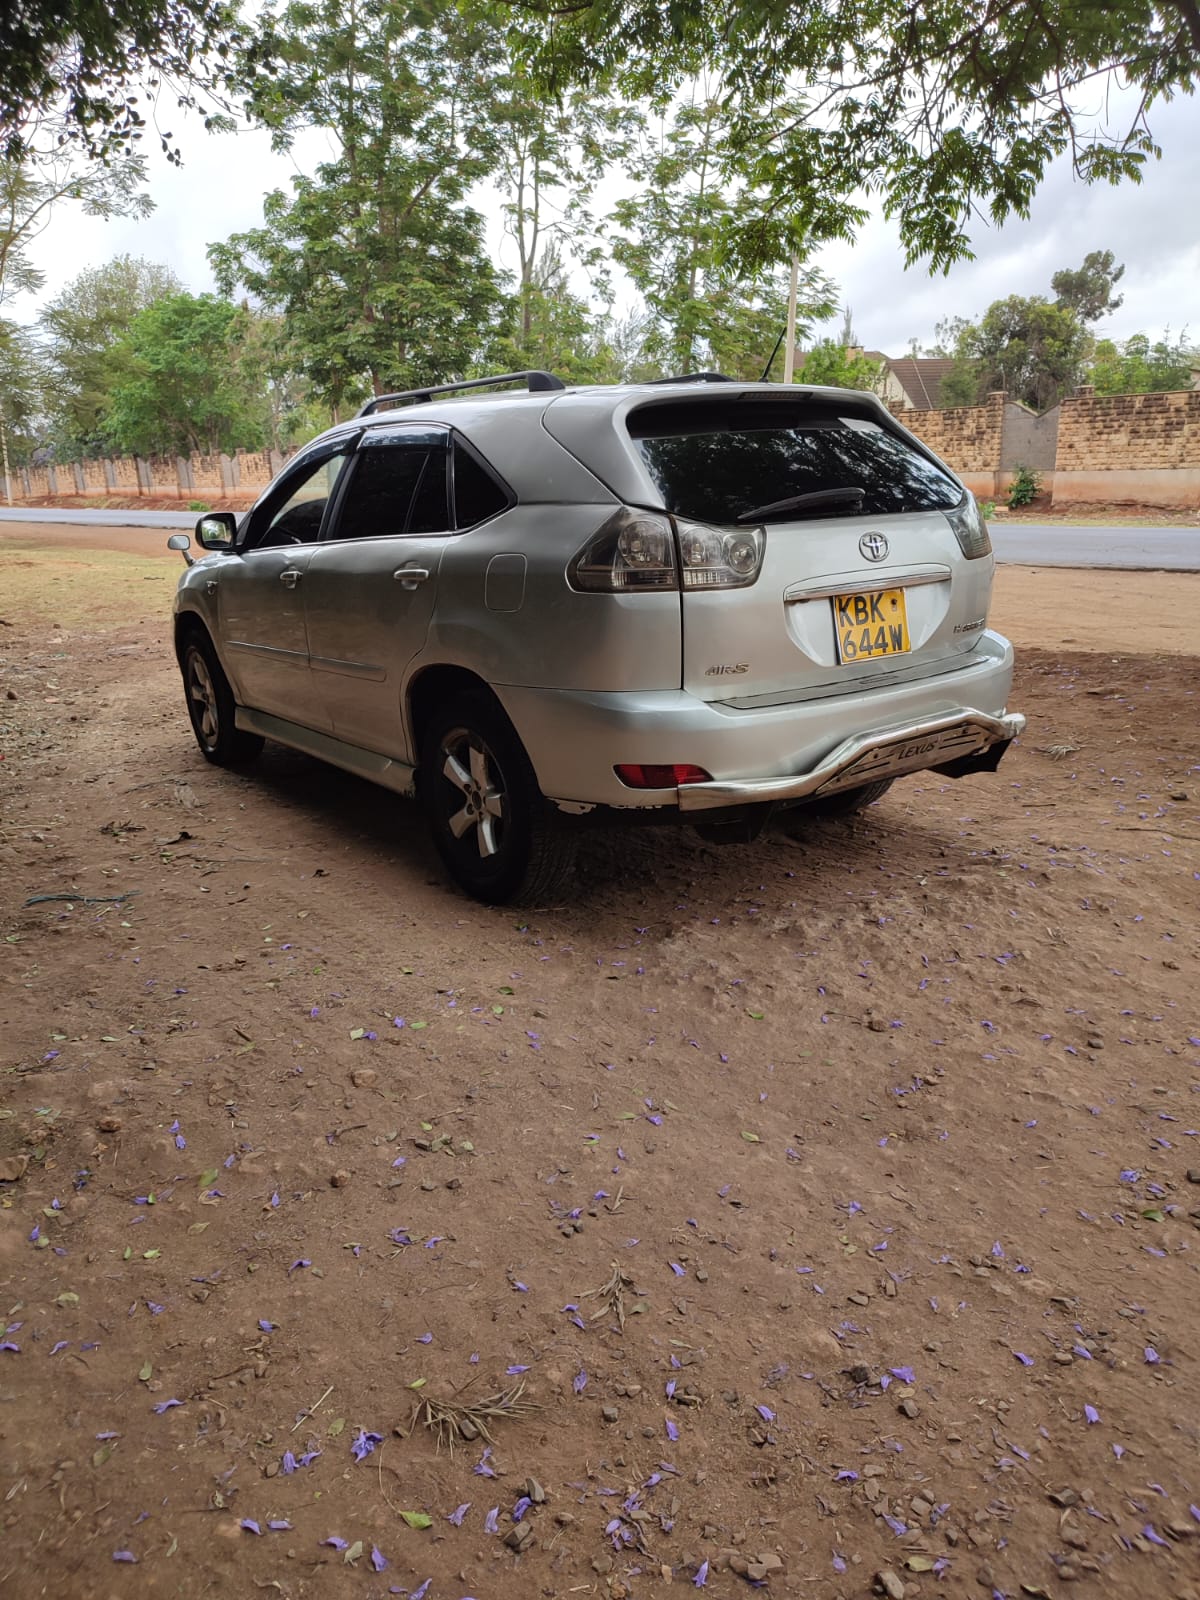 Toyota Harrier Cheapest! You Pay 30% Deposit Trade in OK Wow